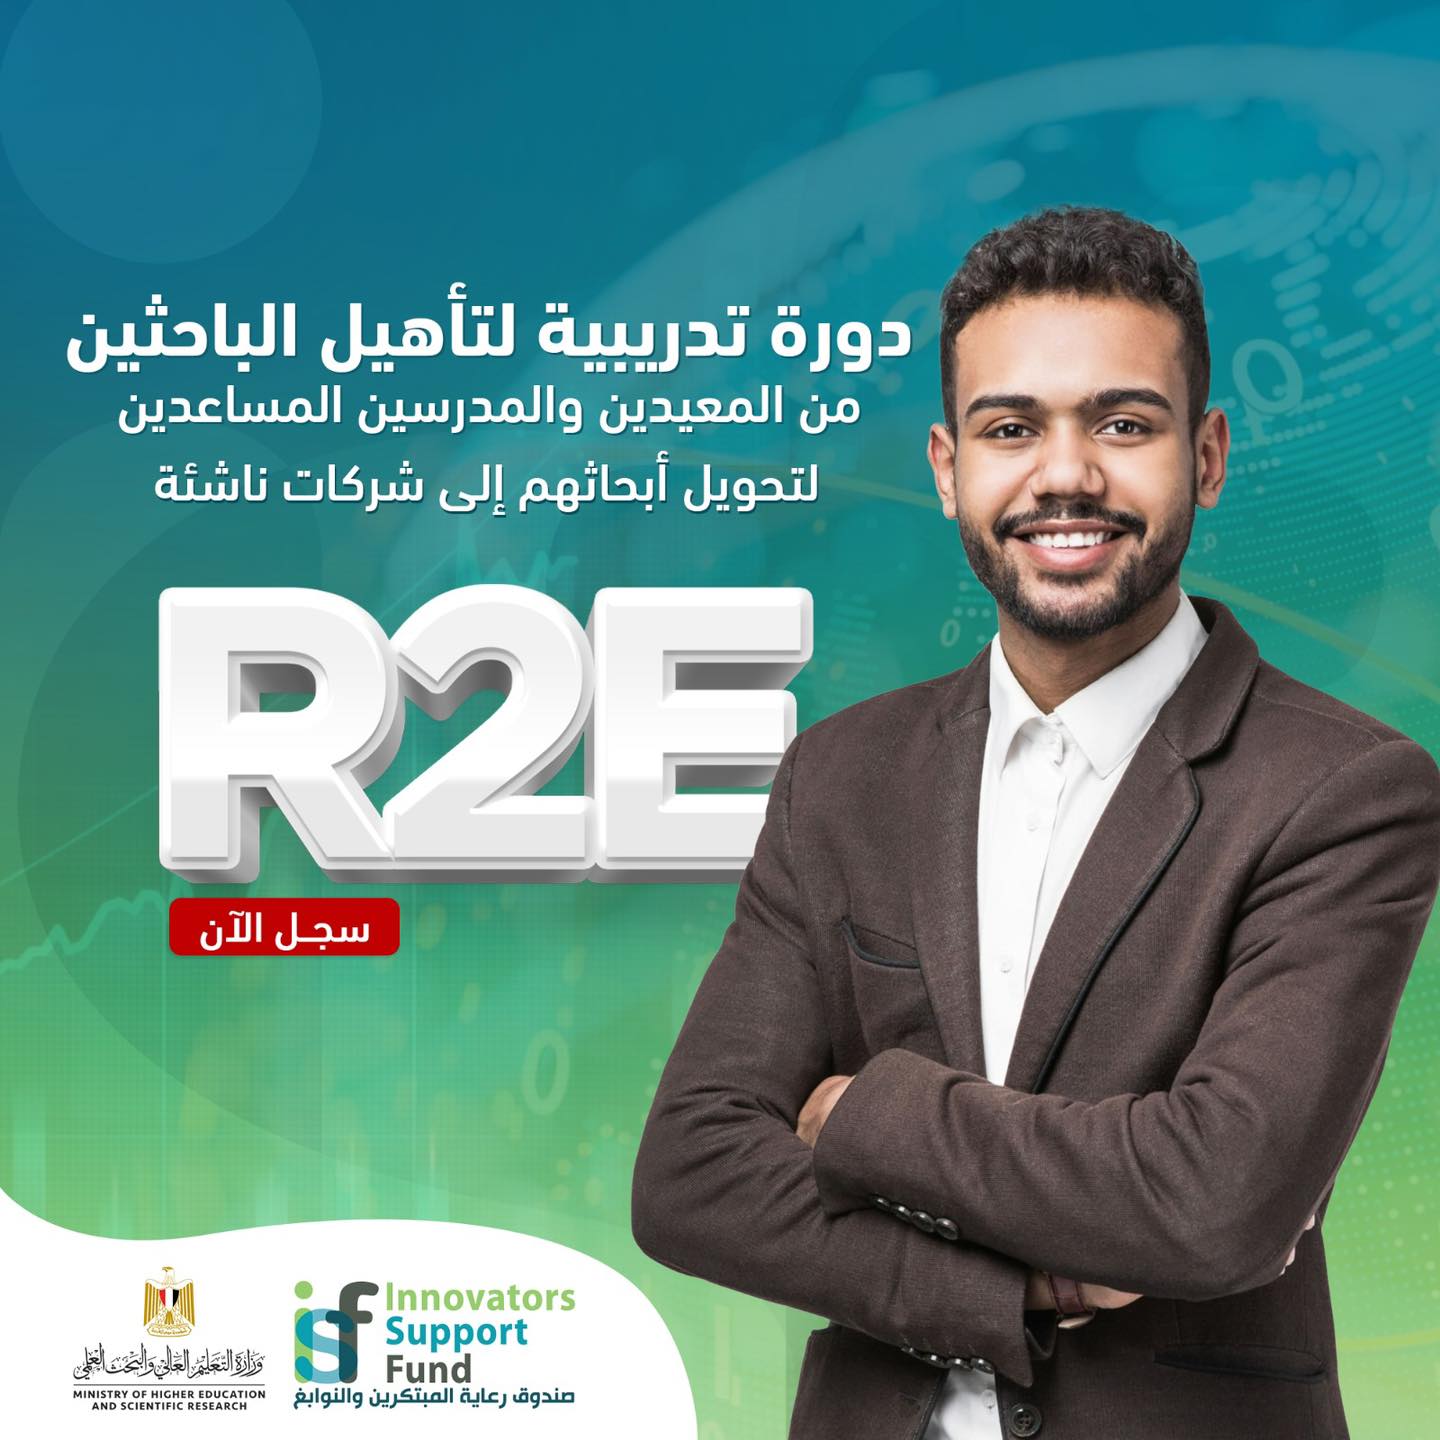 Launching the third cycle of the Entrepreneurship Researchers (R2E) Program in Egyptian universities and research institutes